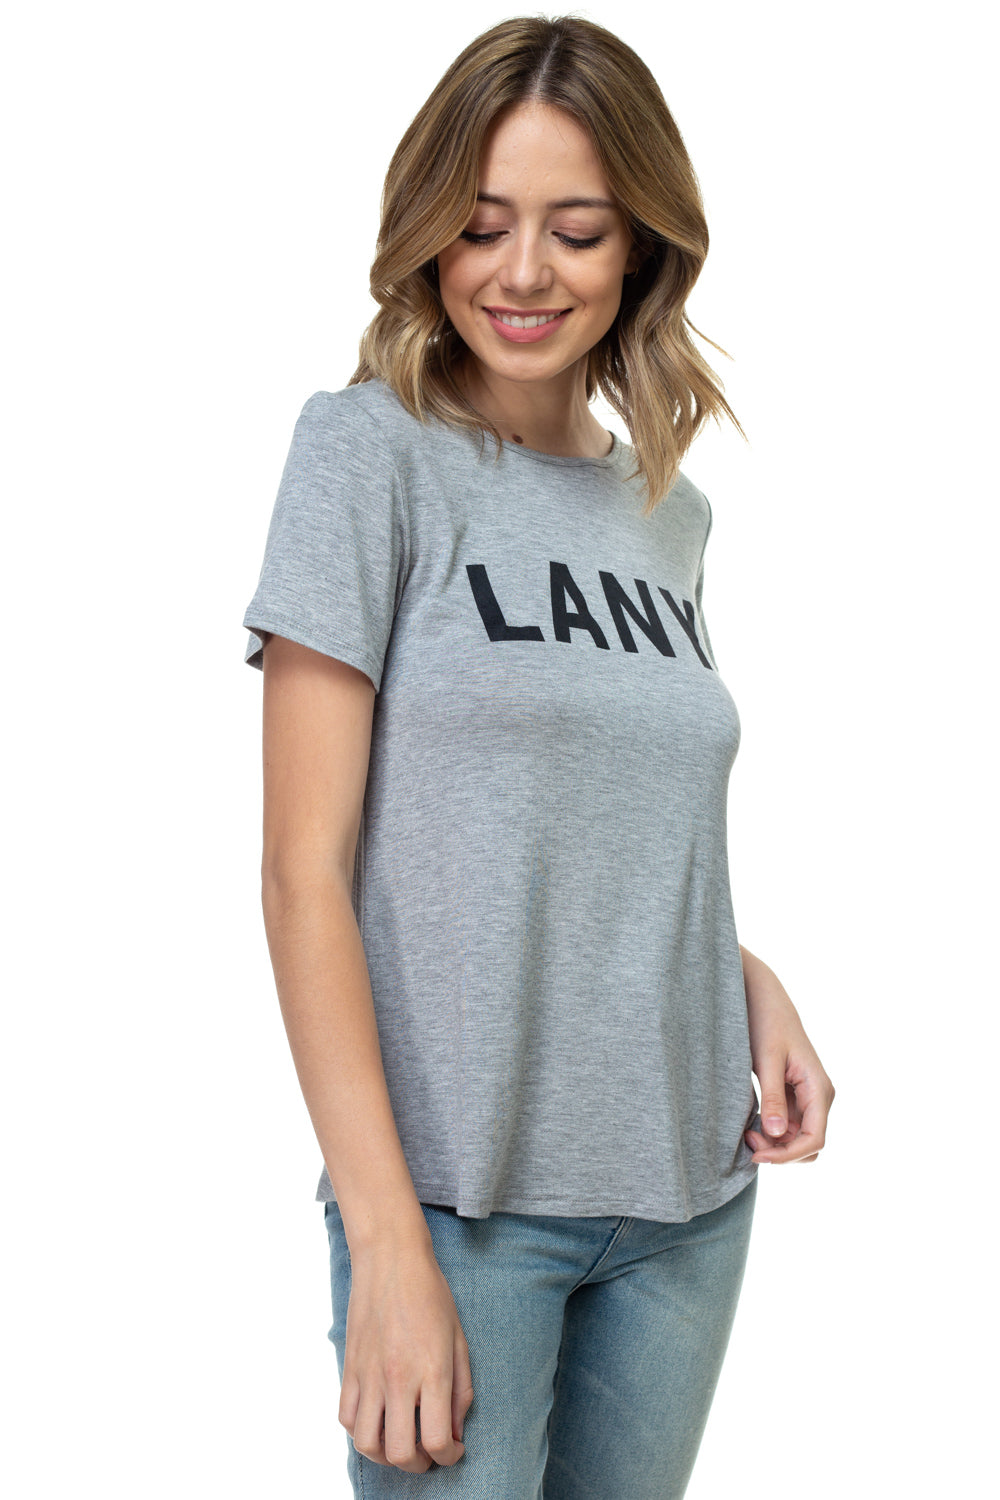 Strappy Back Tee - LANY